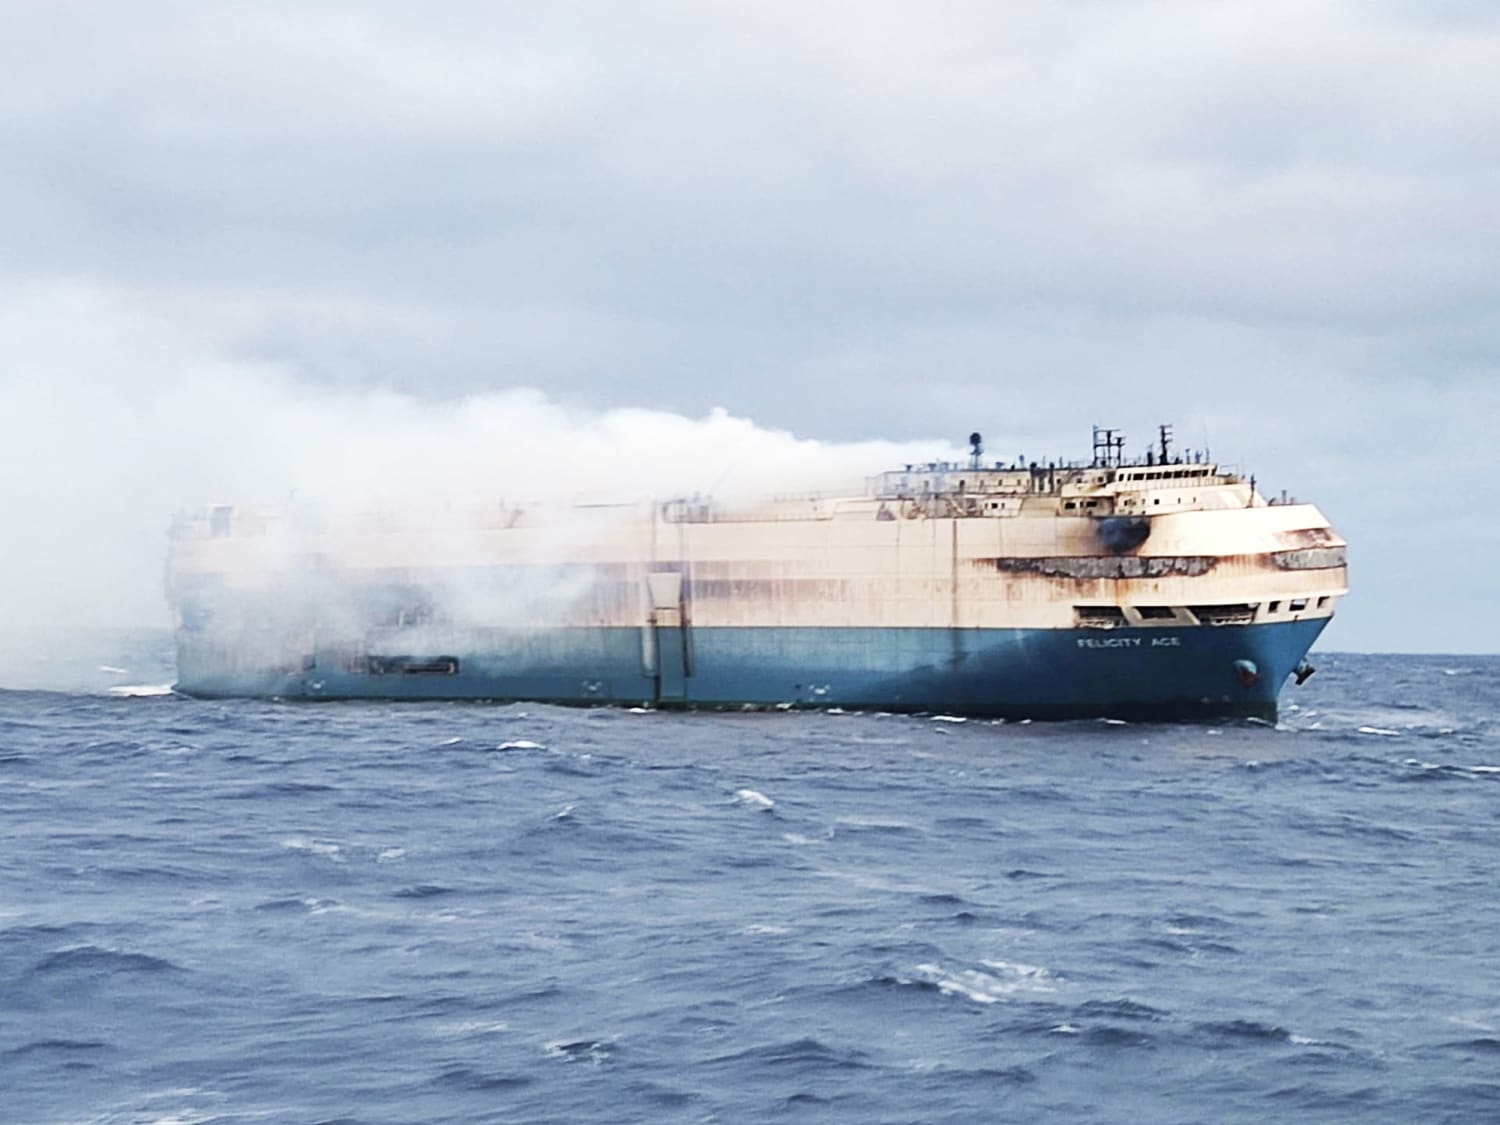 Tugboats spray water on burning ship carrying Porsches, Audis and Bentleys